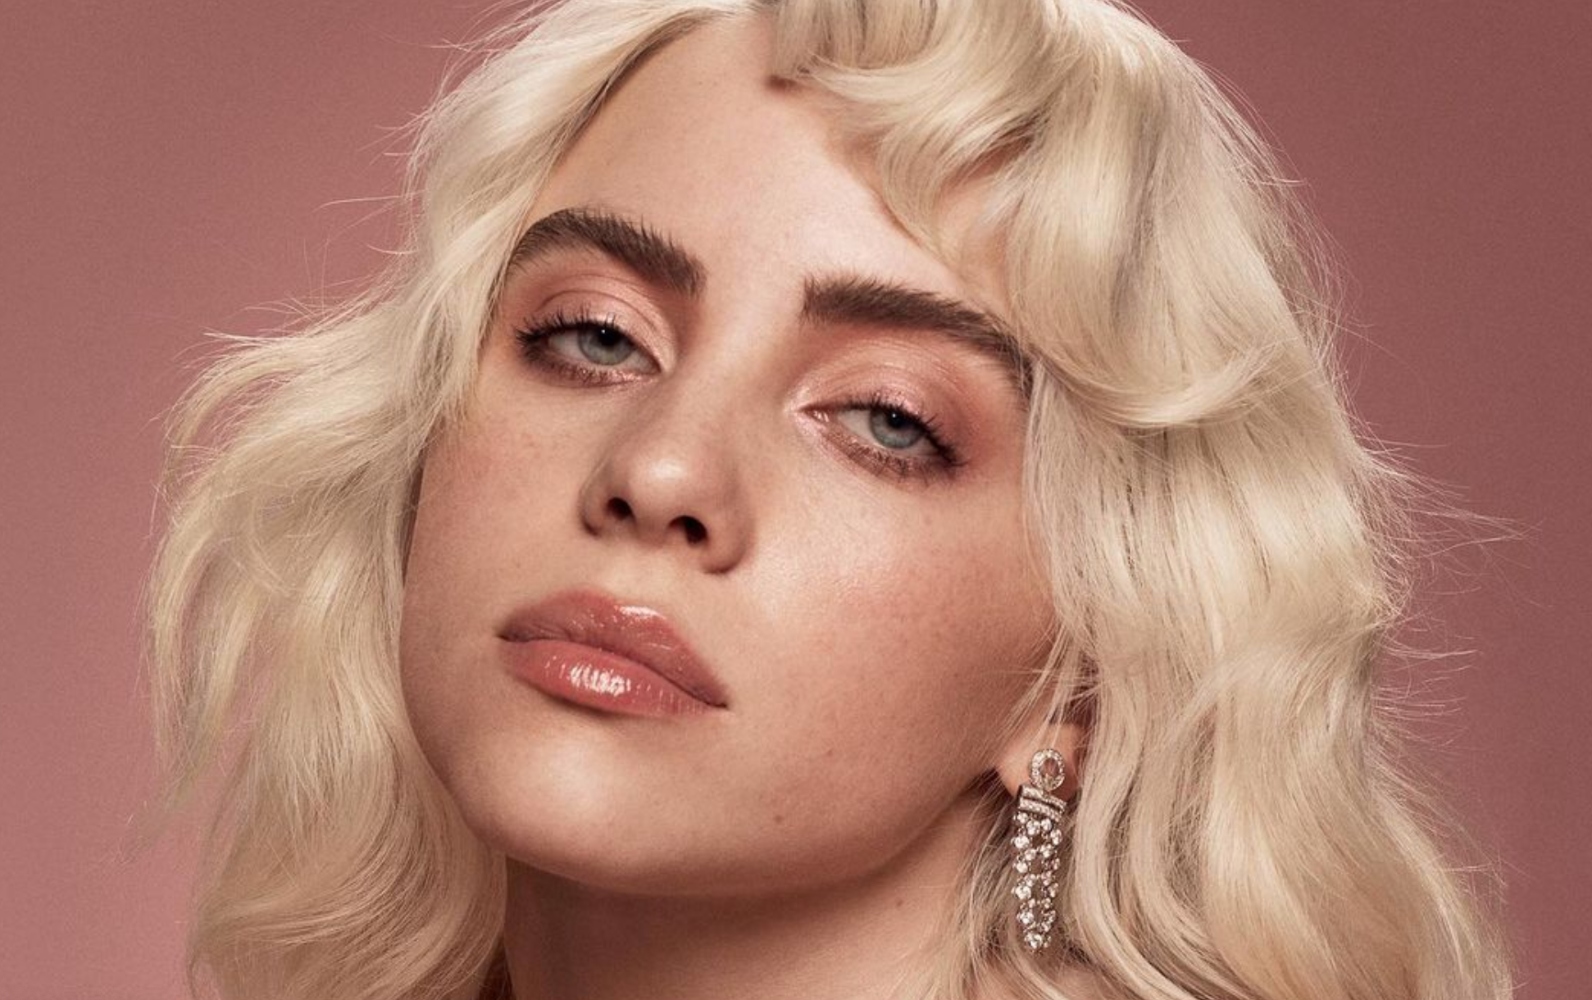 Billie Eilish's Blonde Hair Is the Most Dramatic Hair Change She's Ever Had - wide 1